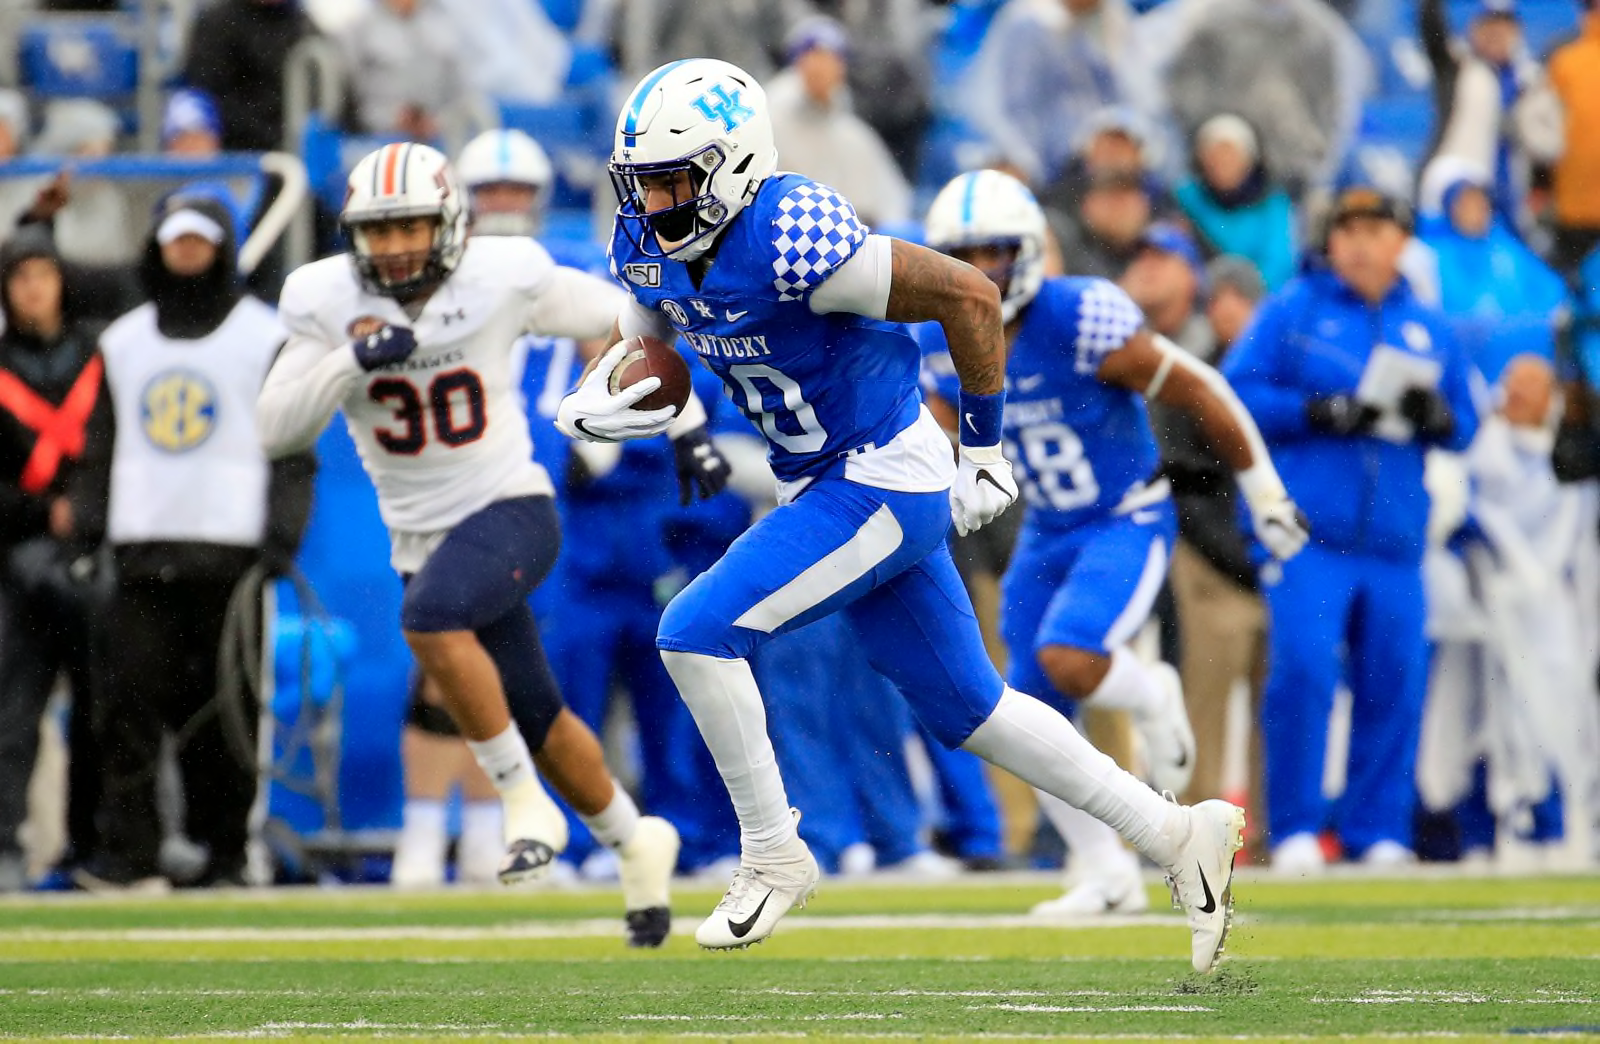 Kentucky Football: Way-too-early 2020 depth chart projections - Page 3